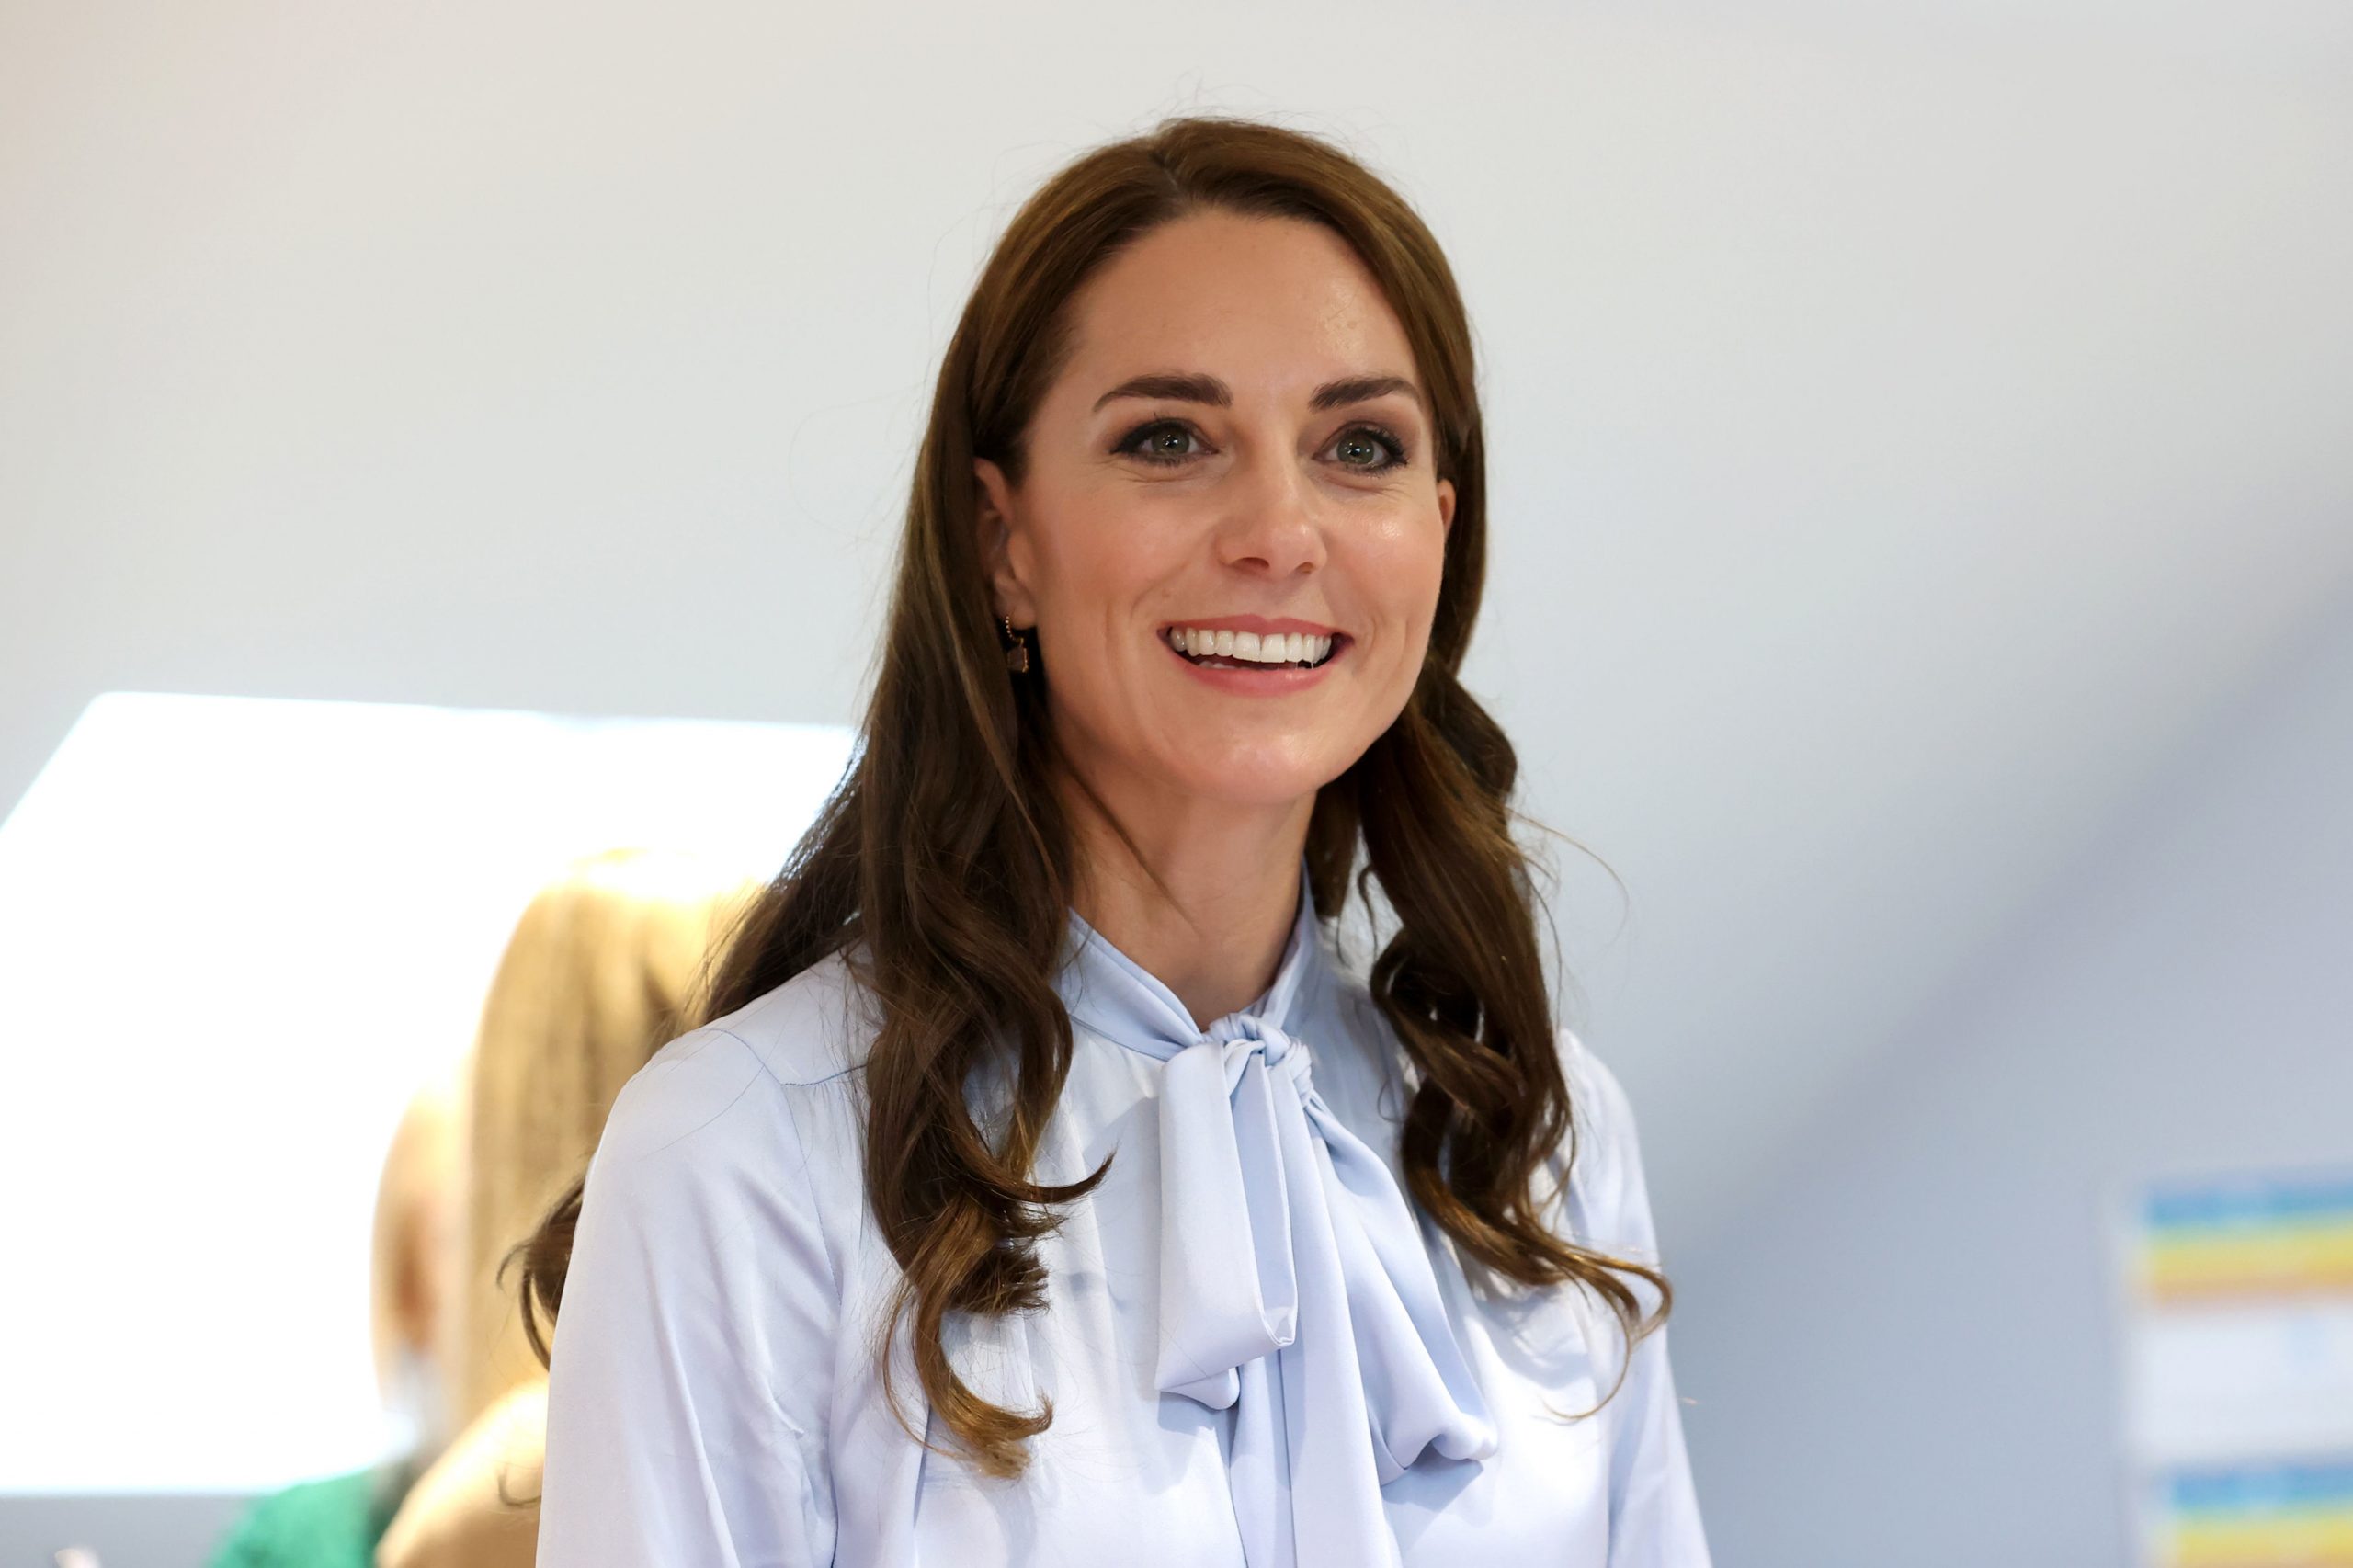 Kate Middleton hides a flaw with her hairstyle - The Fashion Vibes